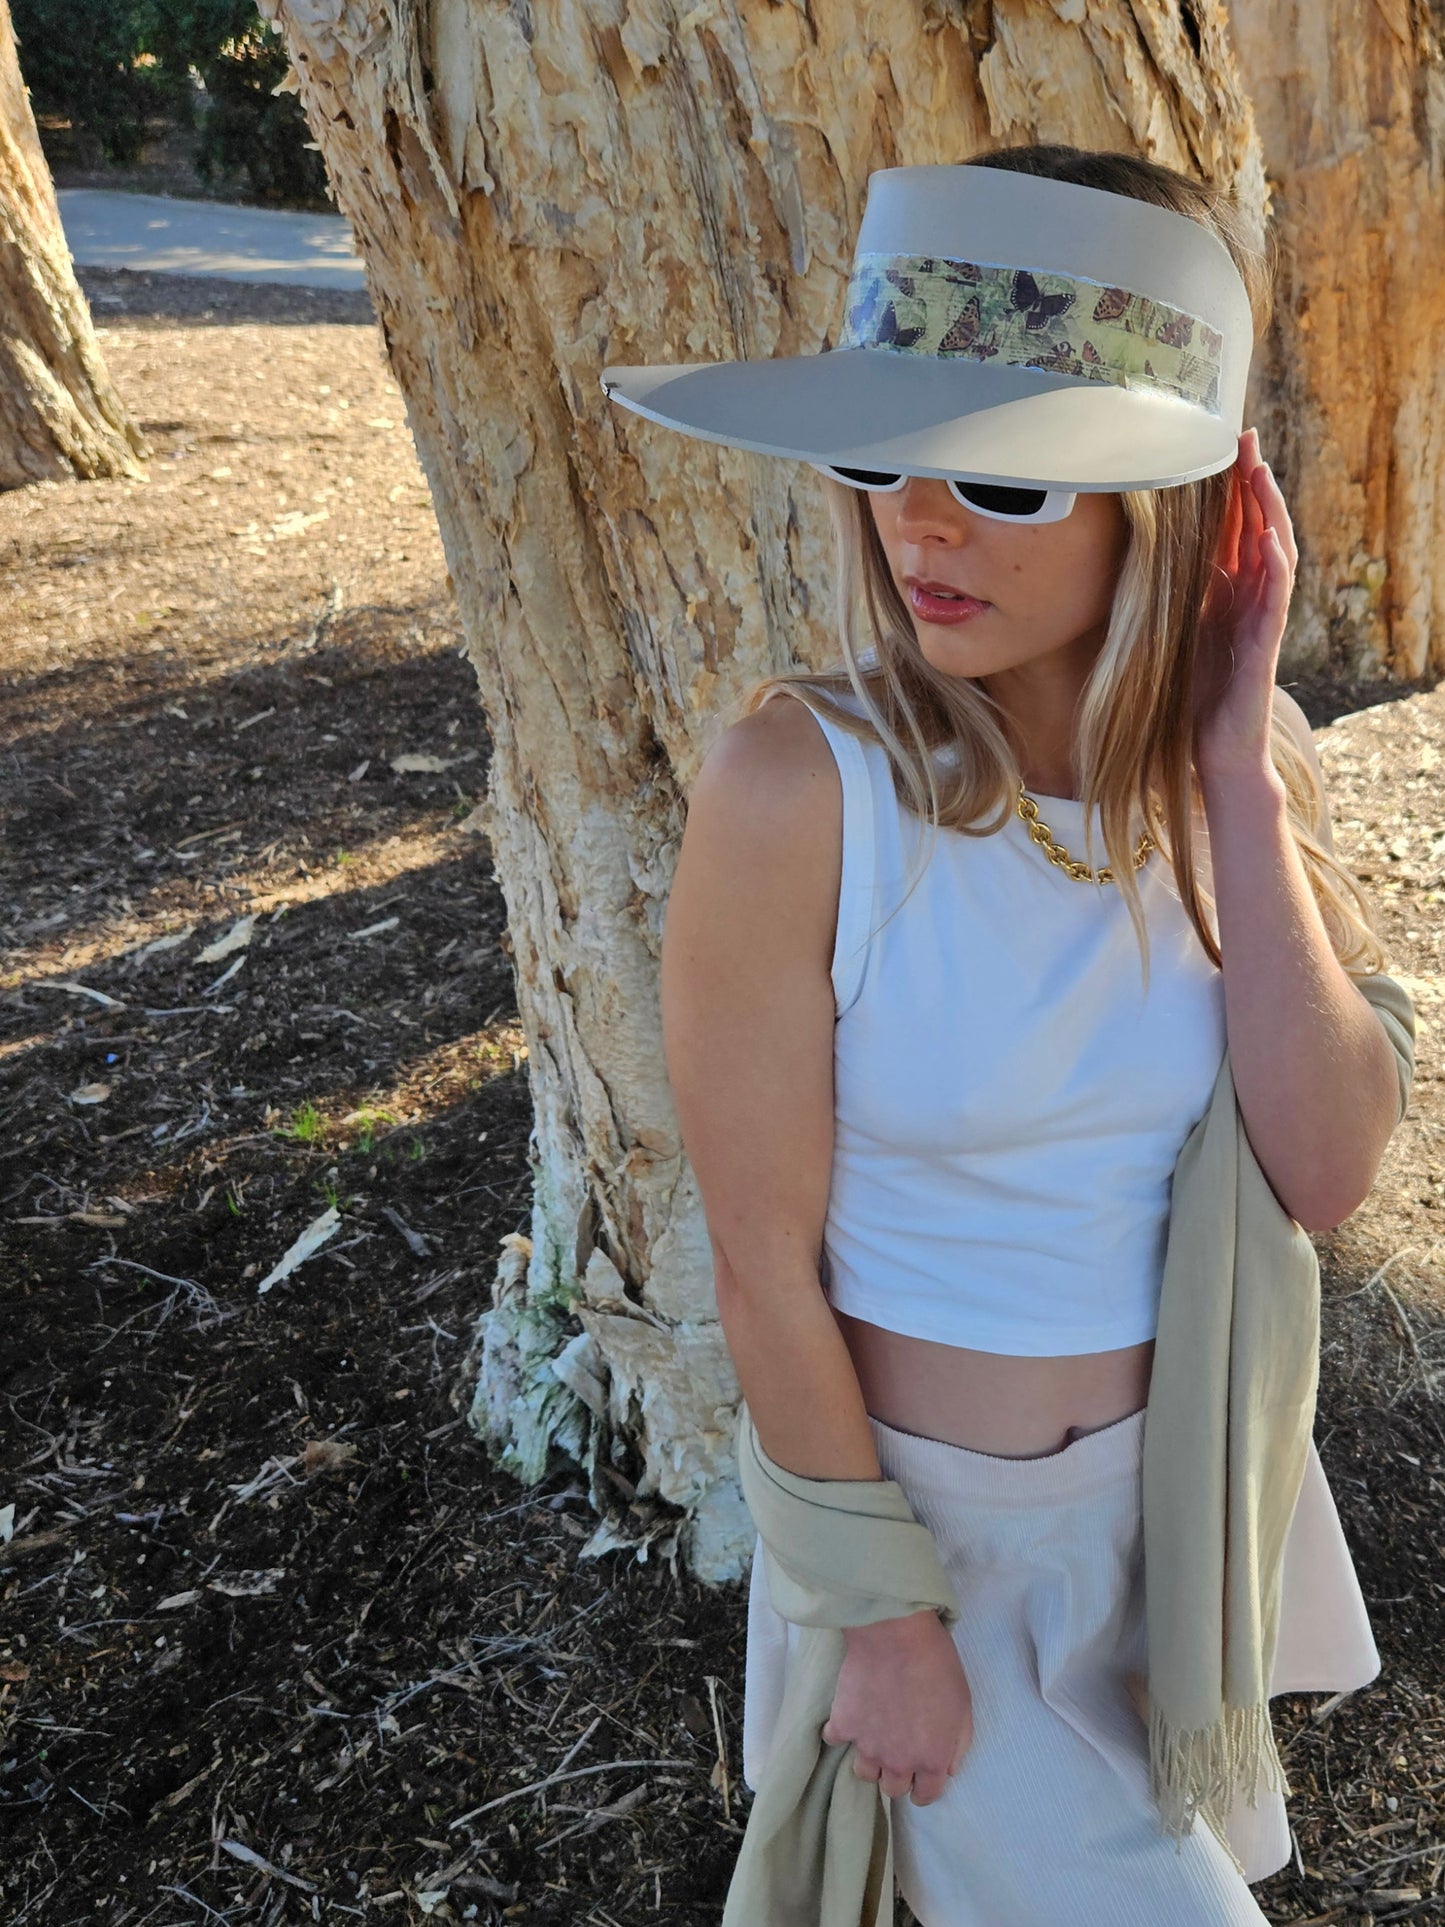 Tall Truly Taupe Audrey Foam Sun Visor Hat with Neutral Butterfly Band and Silver Clamp: Walks, Brunch, Swim, Garden, Golf, Easter, Church, No Headache